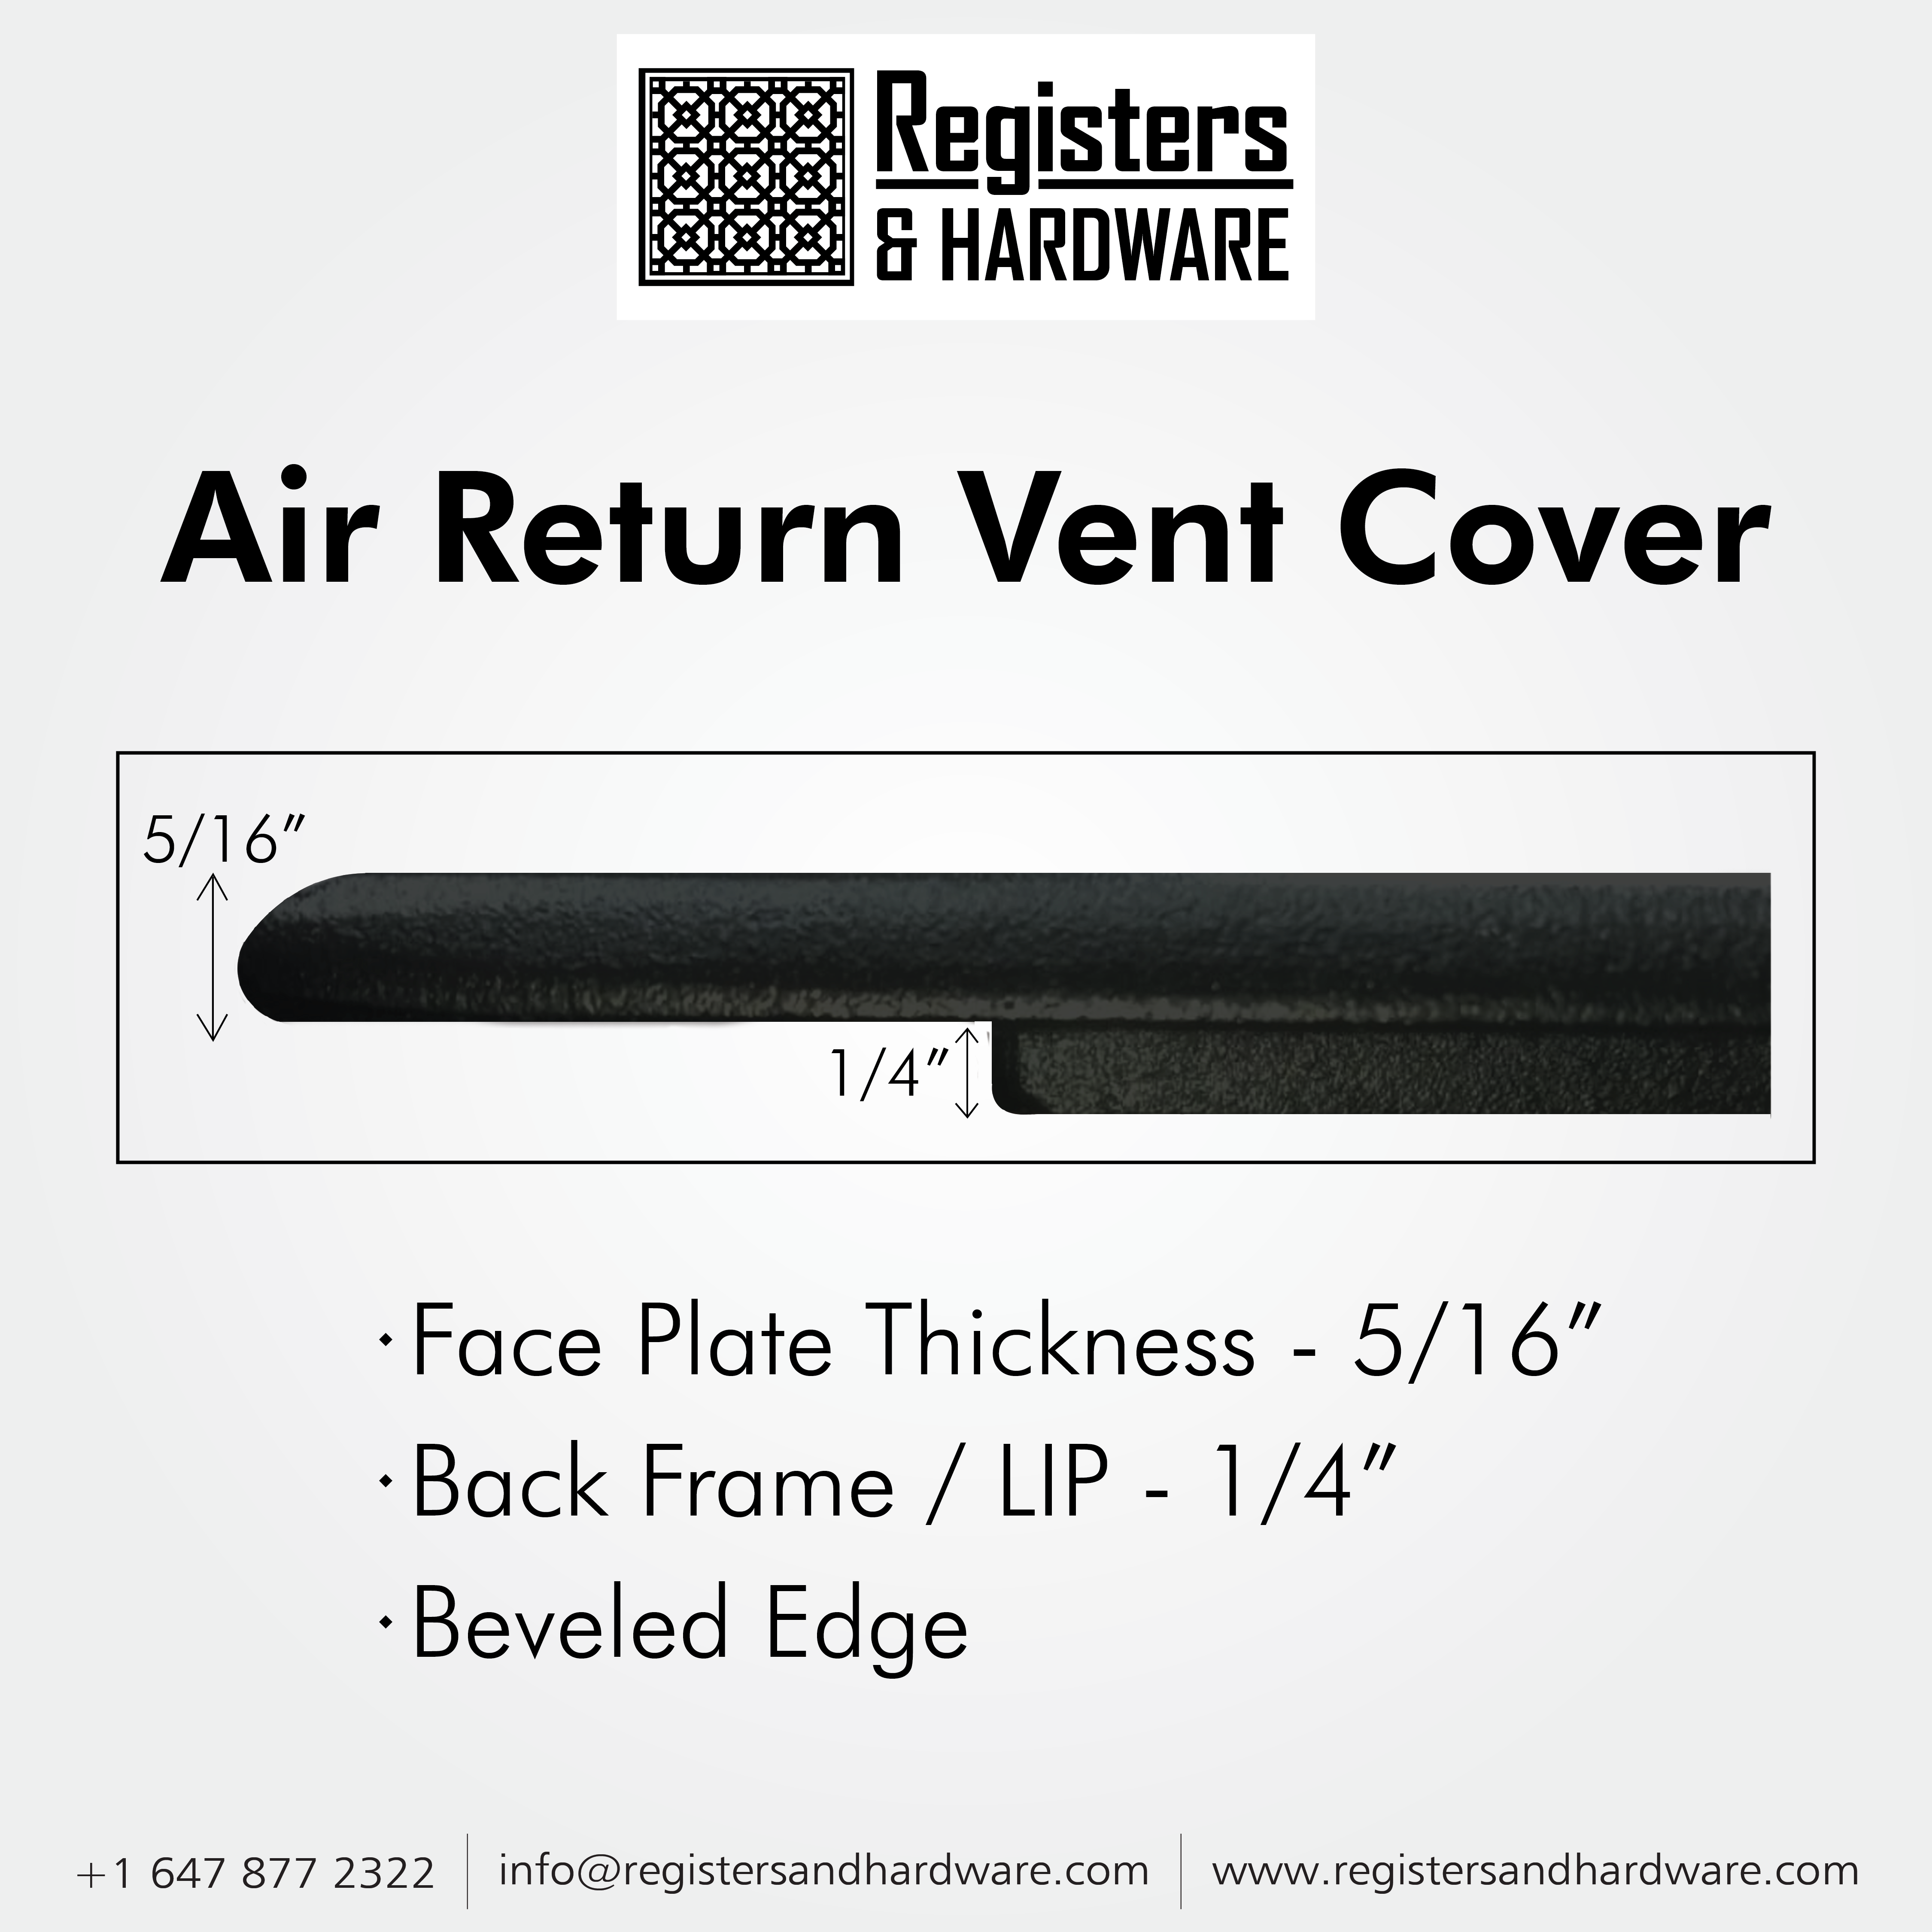 Achtek AIR RETURN 6"x24" Duct Opening (Overall Size 8"x26") | Heavy Cast Aluminum Air Grille HVAC Duct || Powder Coated